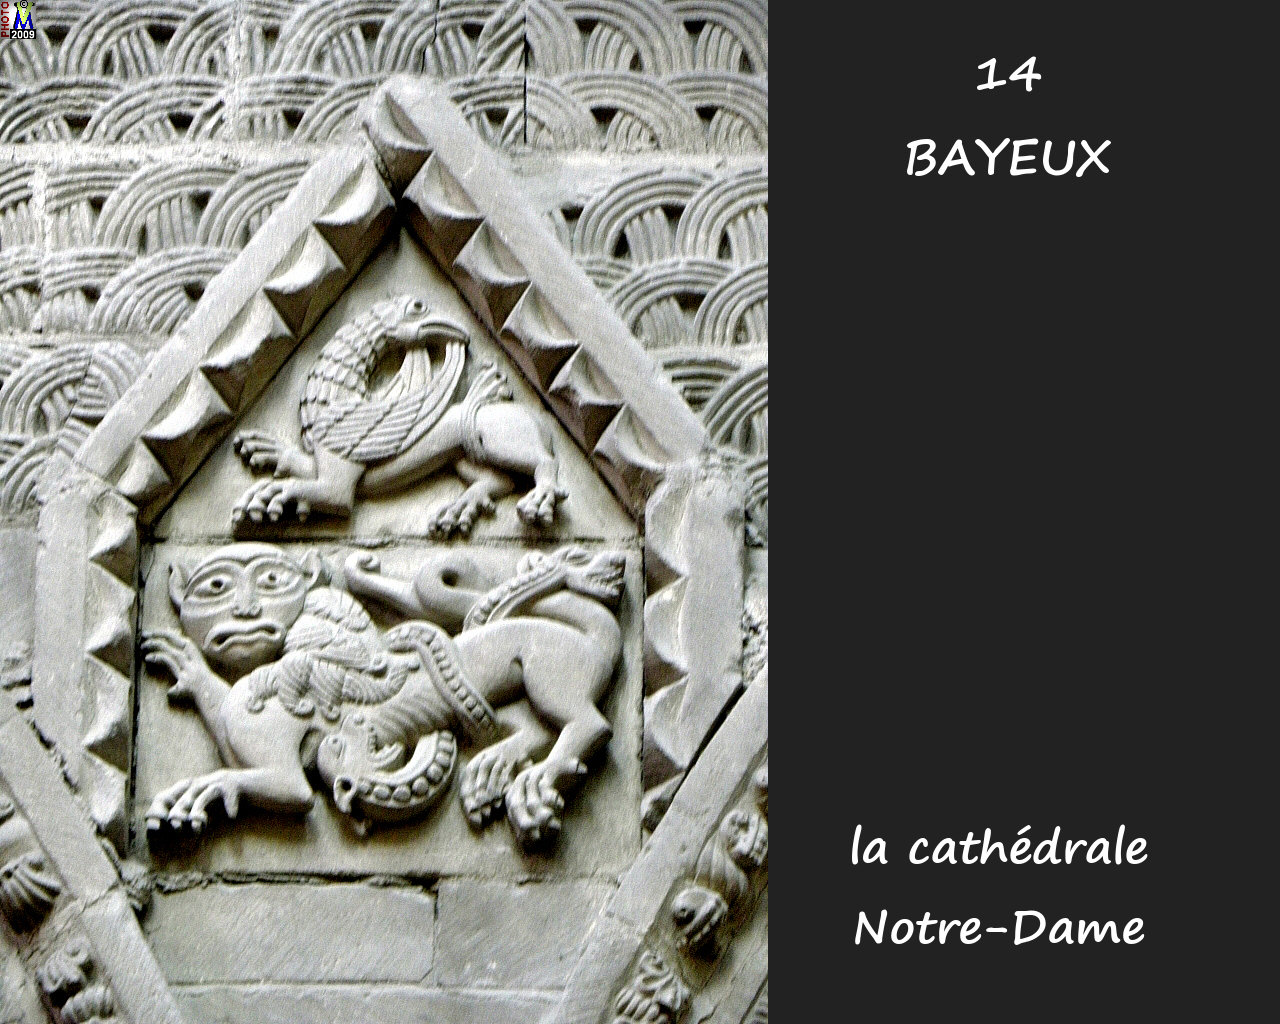 14BAYEUX_cathedrale_220.jpg